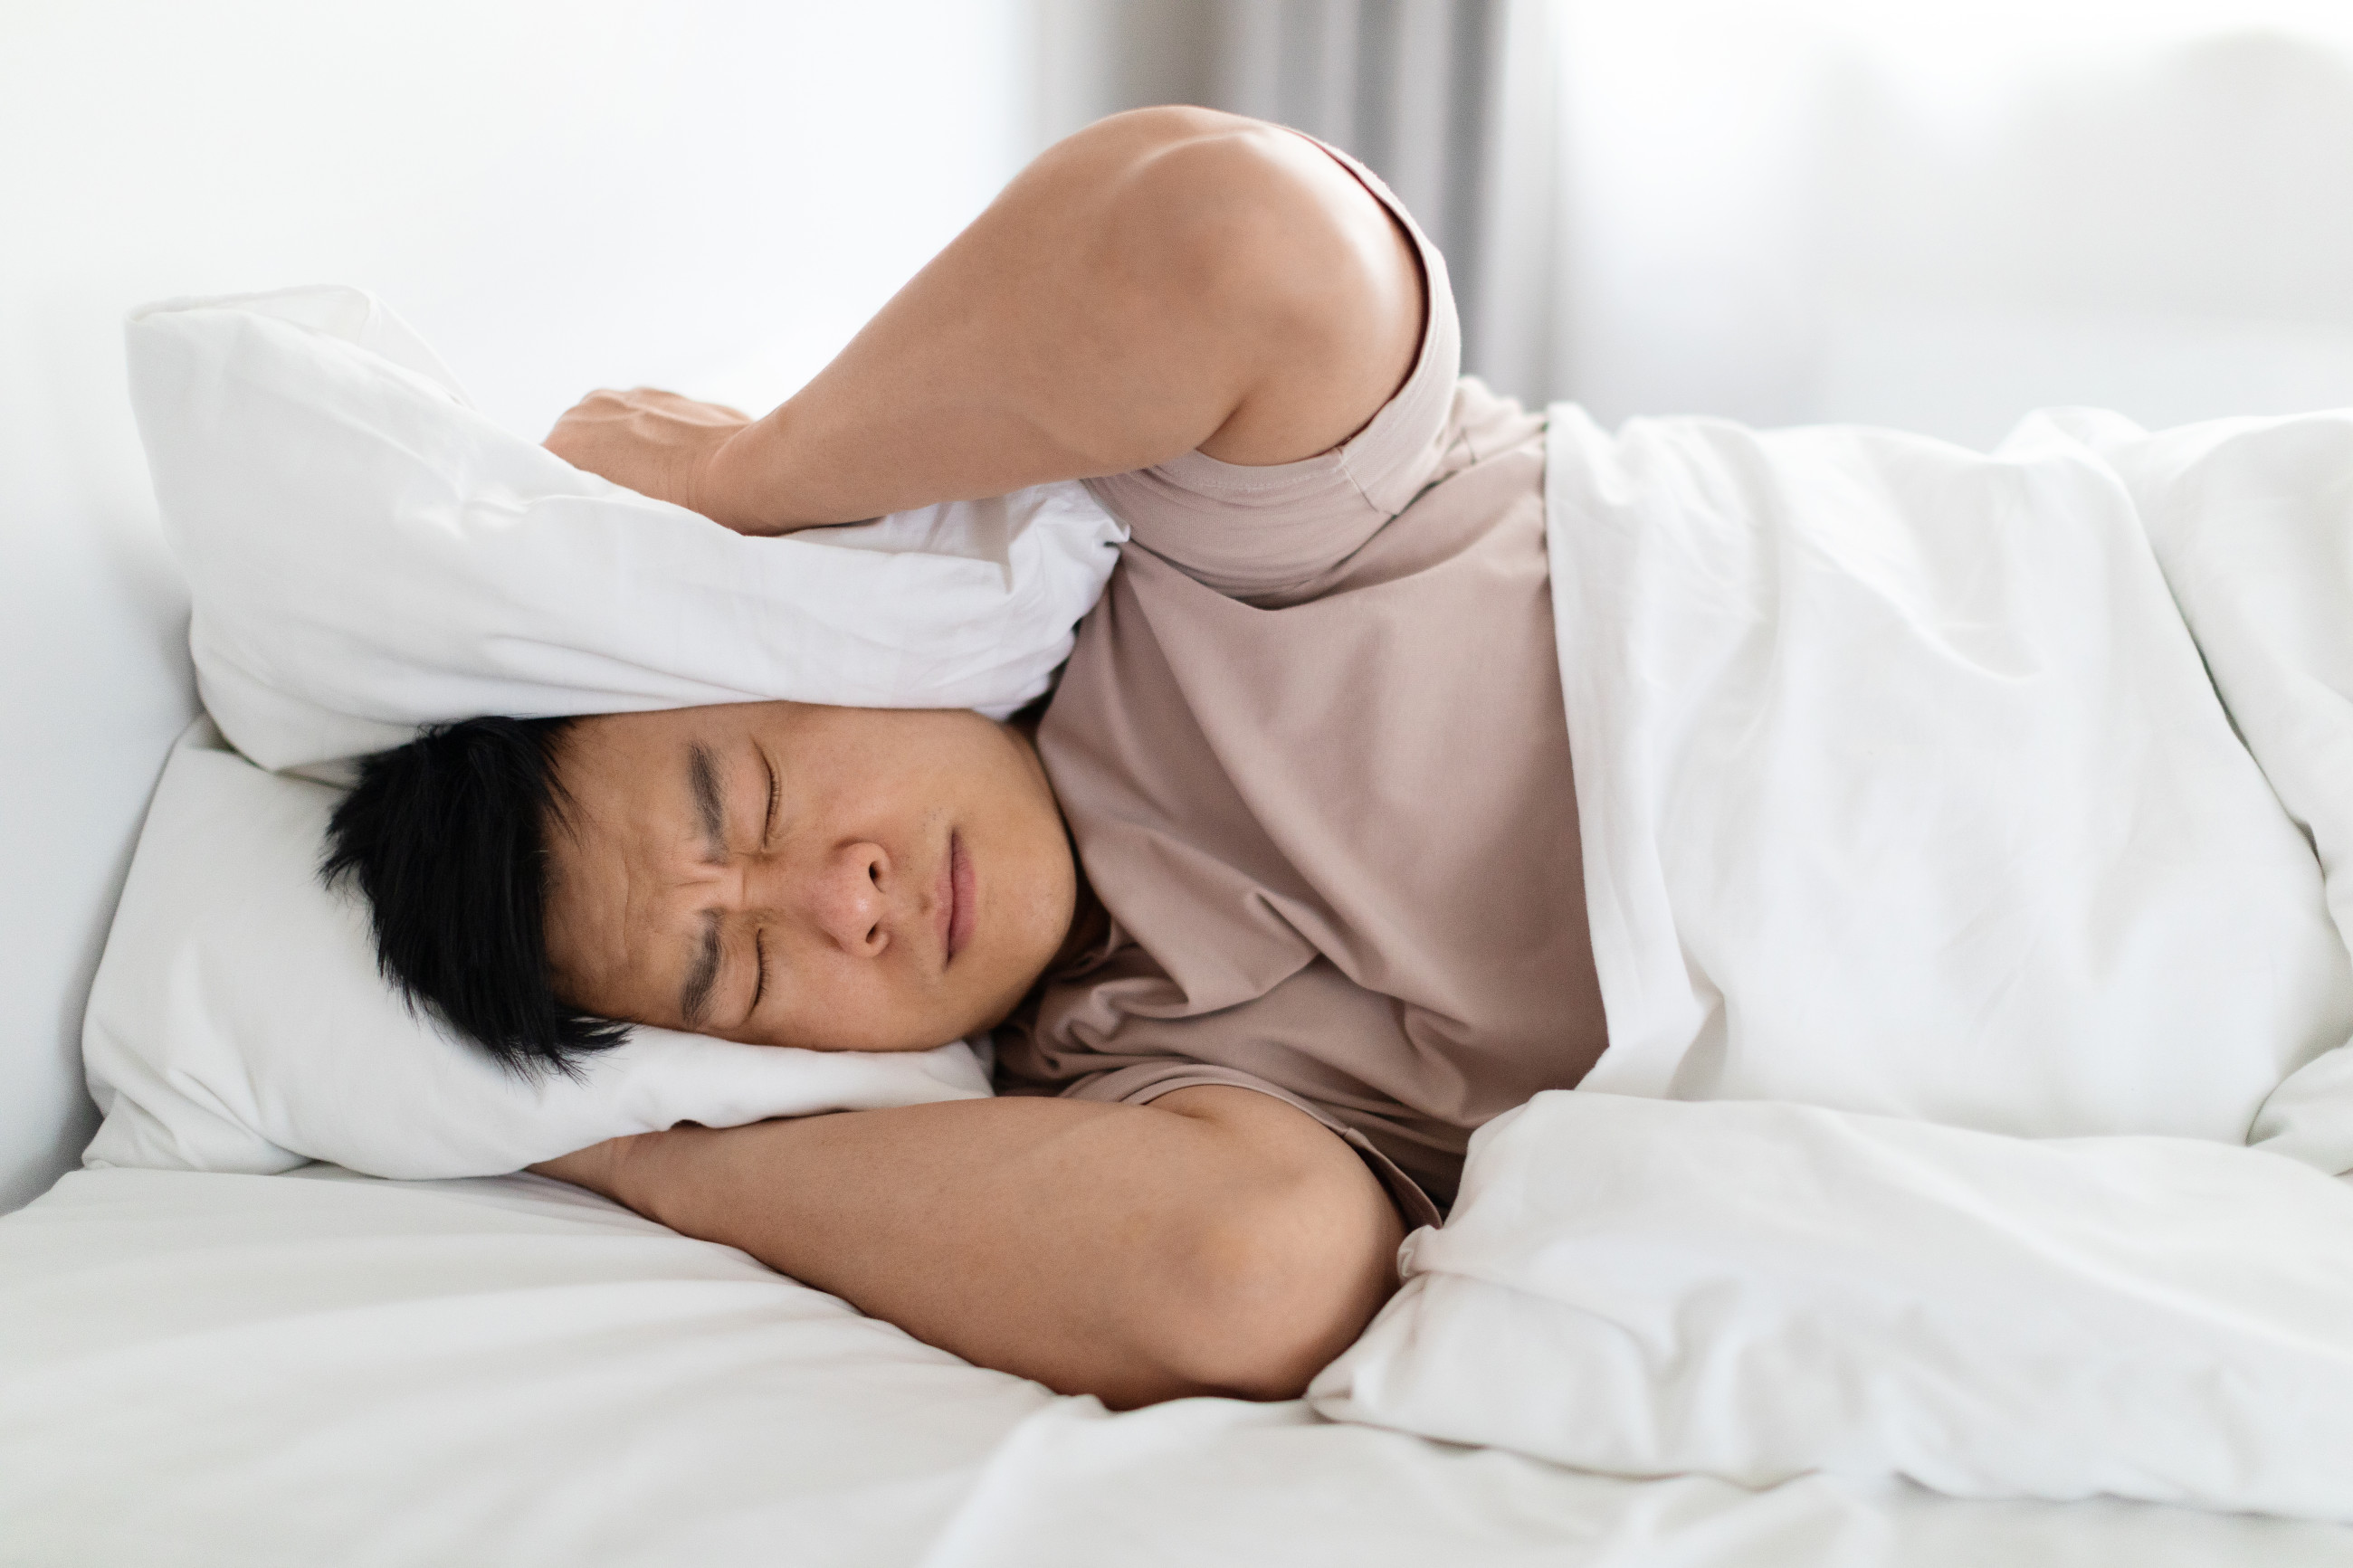 A man in bed holding a pillow over his ears from the noise outside